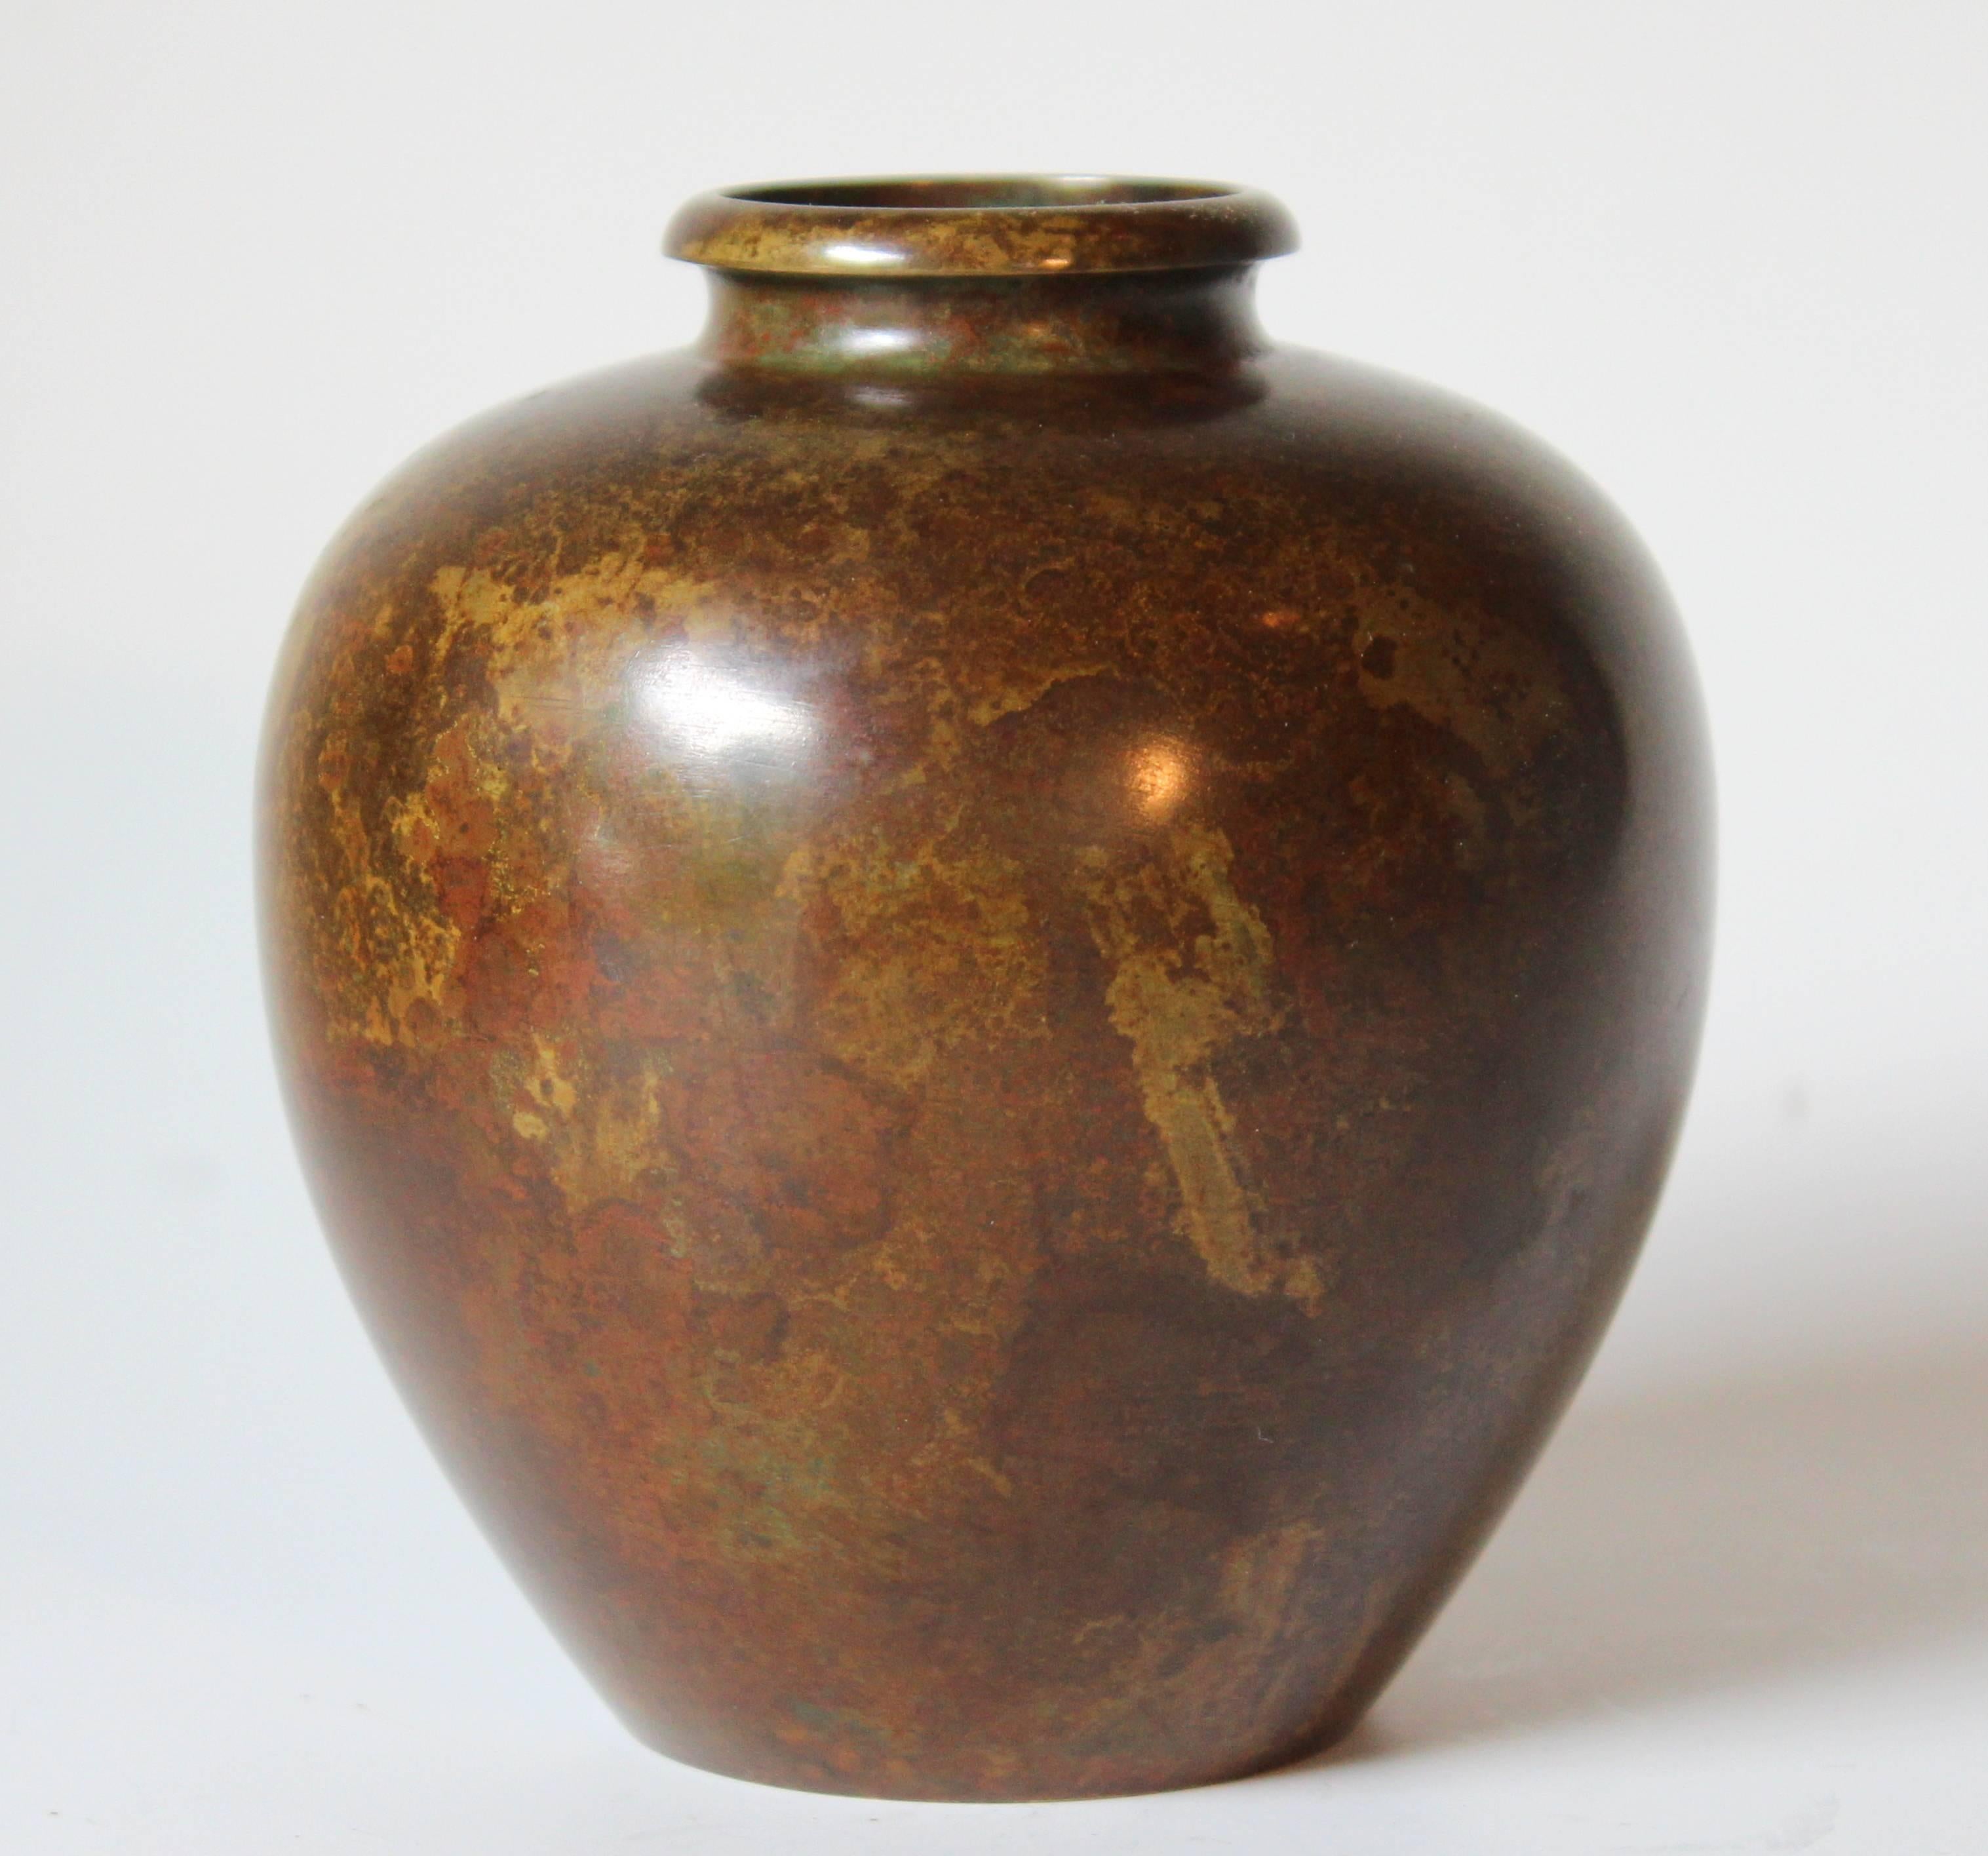 Japanese apple form bronze vase with perfectly rounded shoulder and beautiful, warm, variegated patina, circa mid-20th century. Measures: 4 3/4" high, 4 1/2" diameter. Excellent condition.